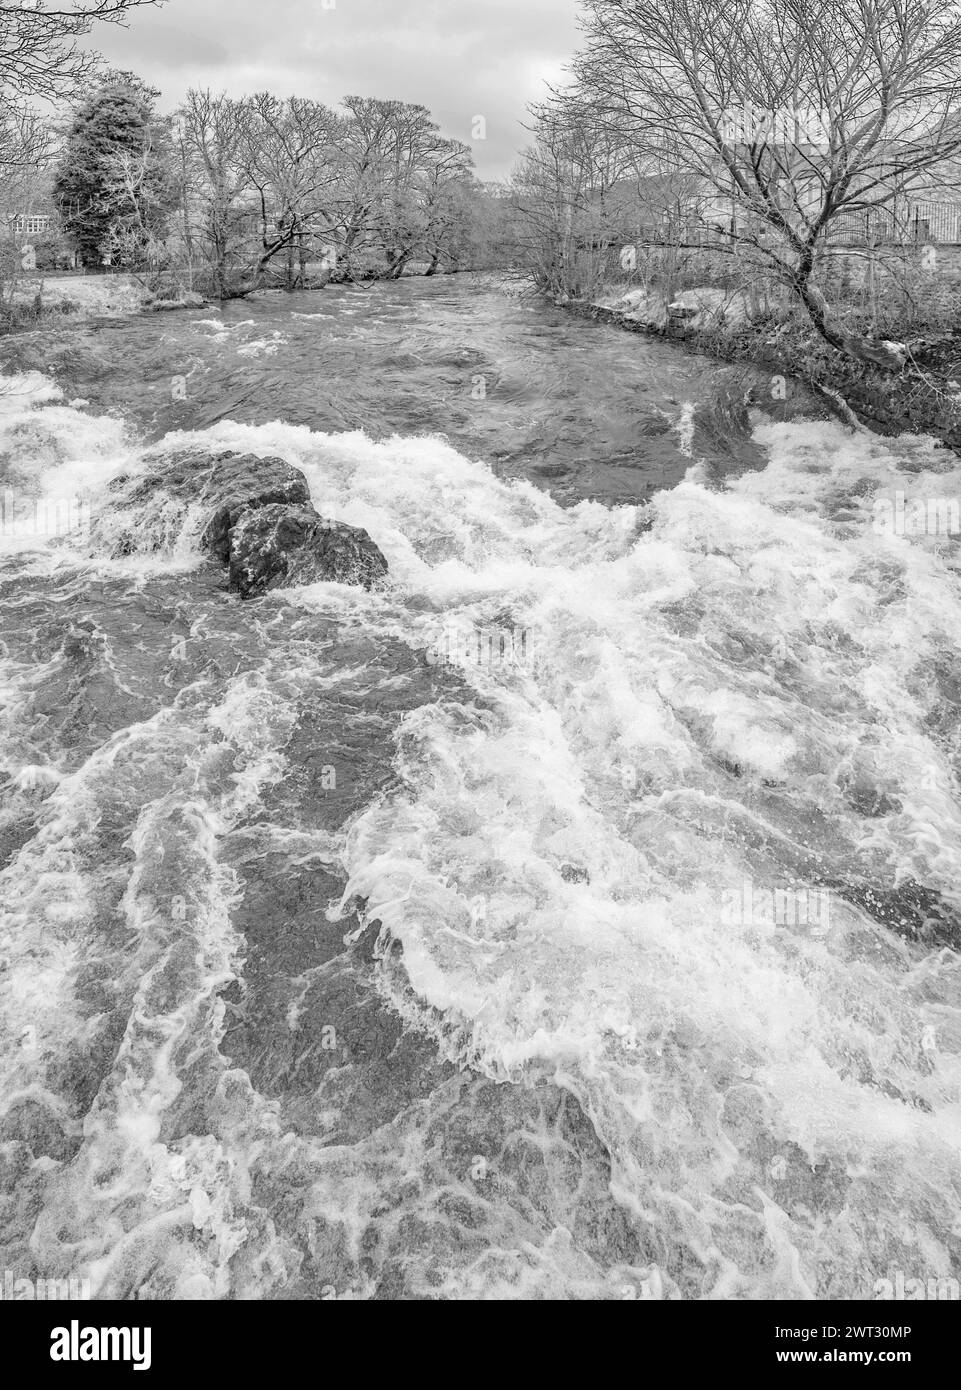 A thunderous roar of water at Queens rock on the River Ribble, Kingsmill, Settle North Yorkshire Stock Photo